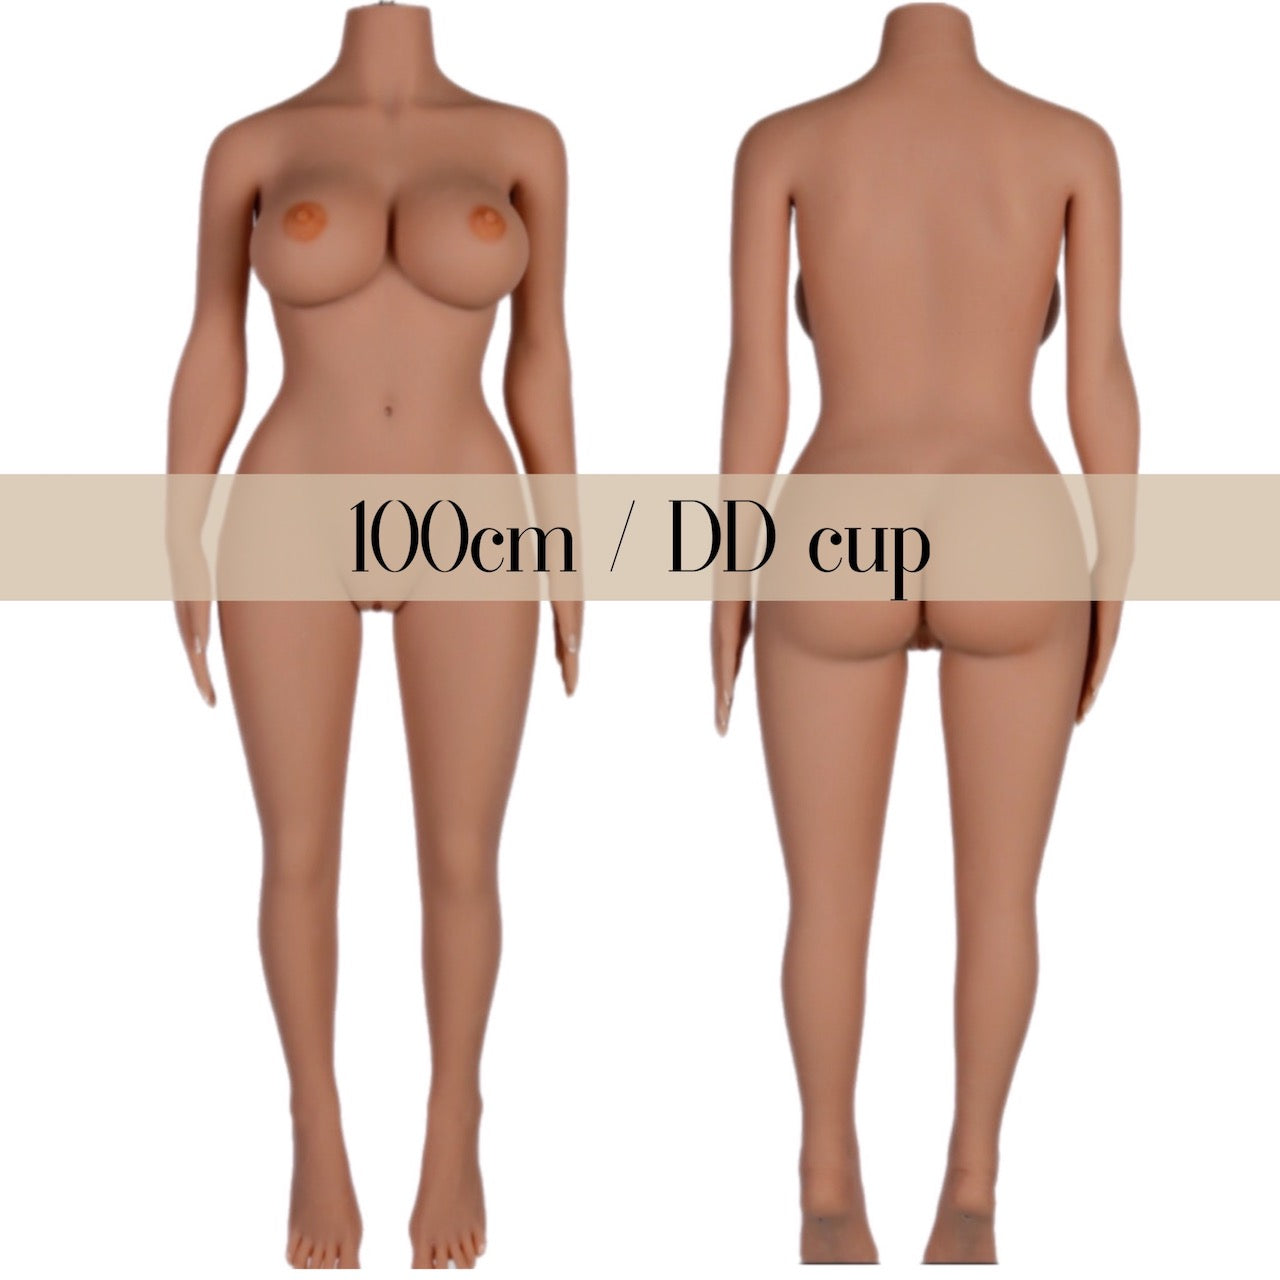 Customize Your Sex Doll - Mini, 100cm / DD cup